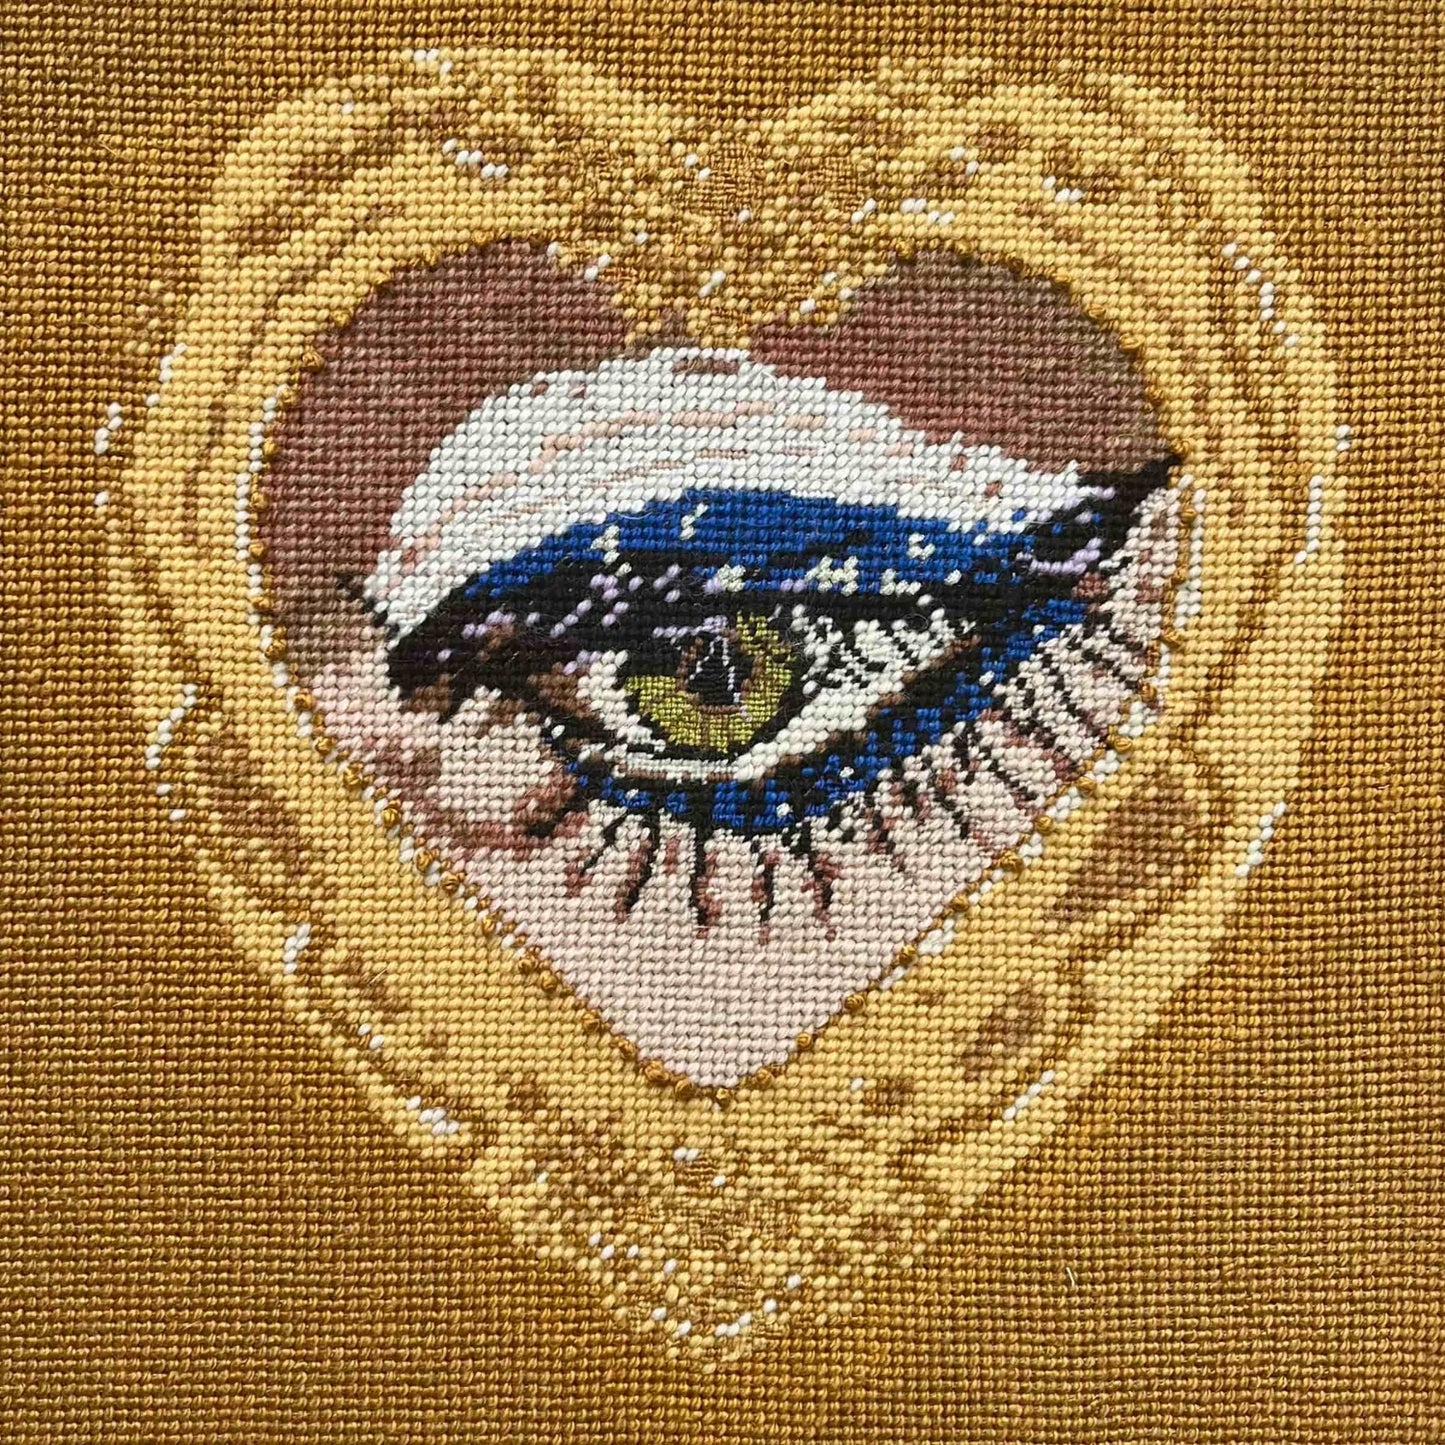 sultry green eye is framed in gold heart, hand-embroidered wool & silk pillow